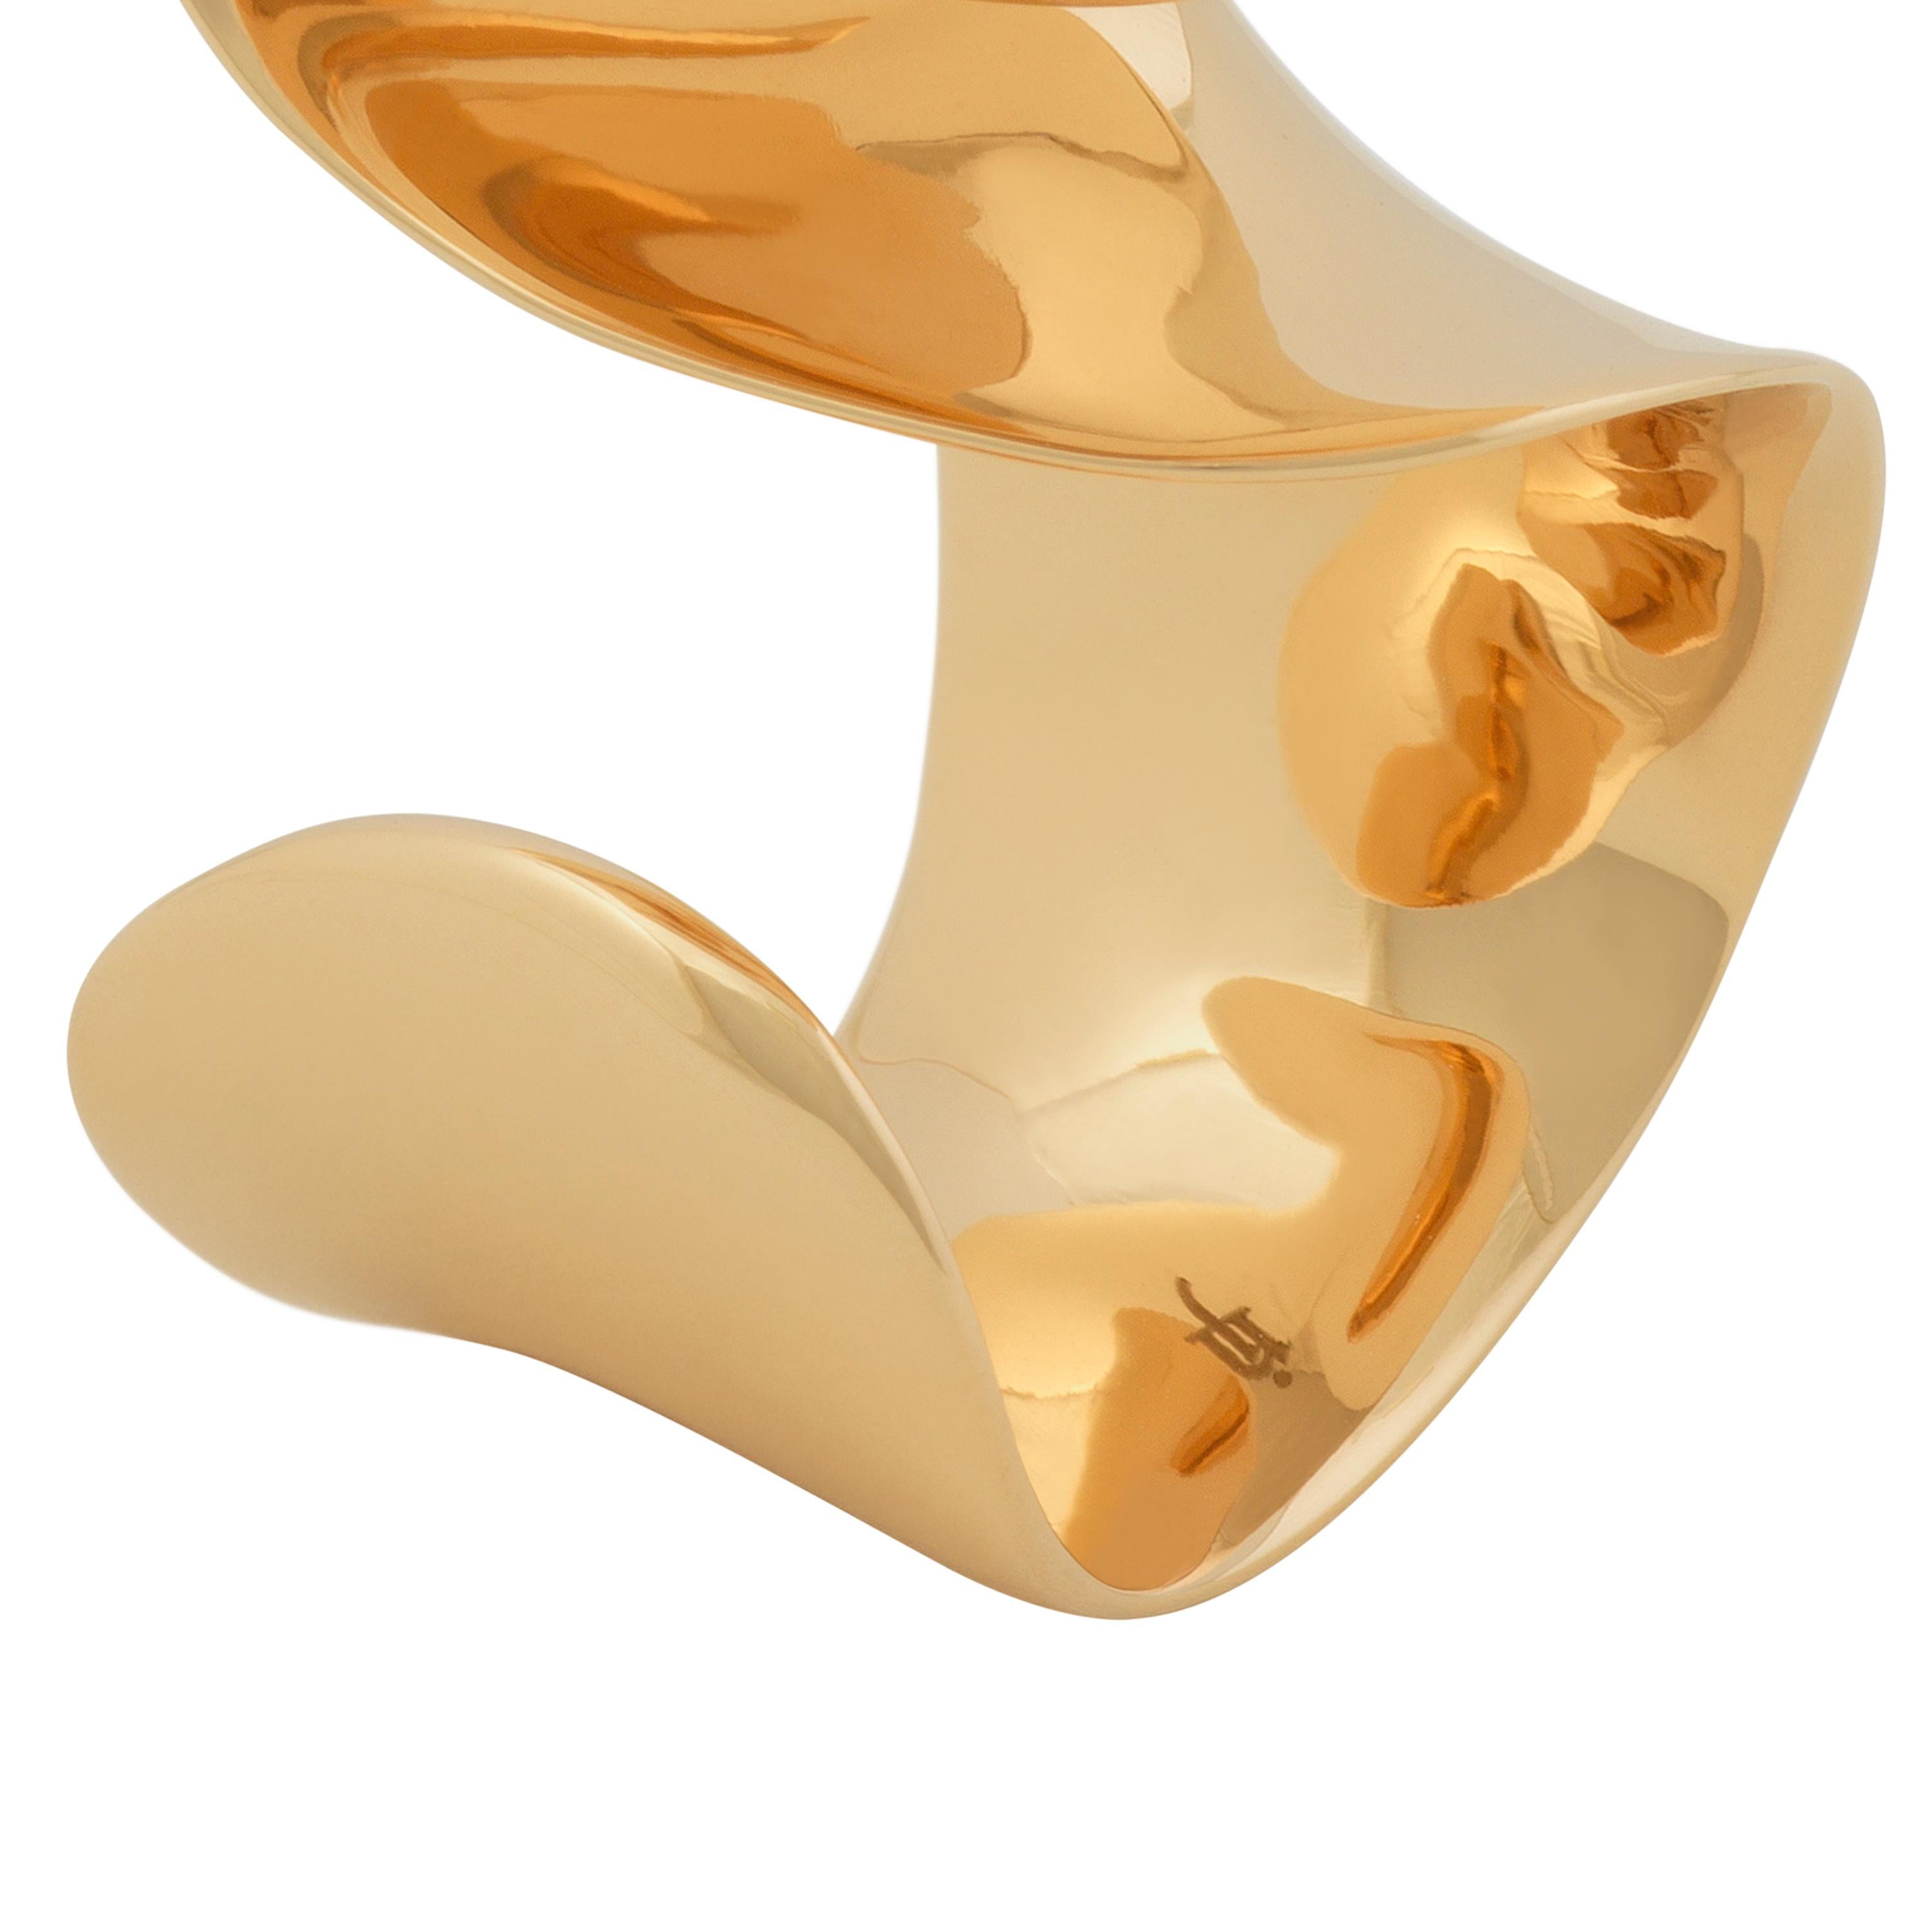 Nathalie Jean Contemporary Limited Edition 18 Karat Gold Sculpture Cocktail Ring For Sale 2